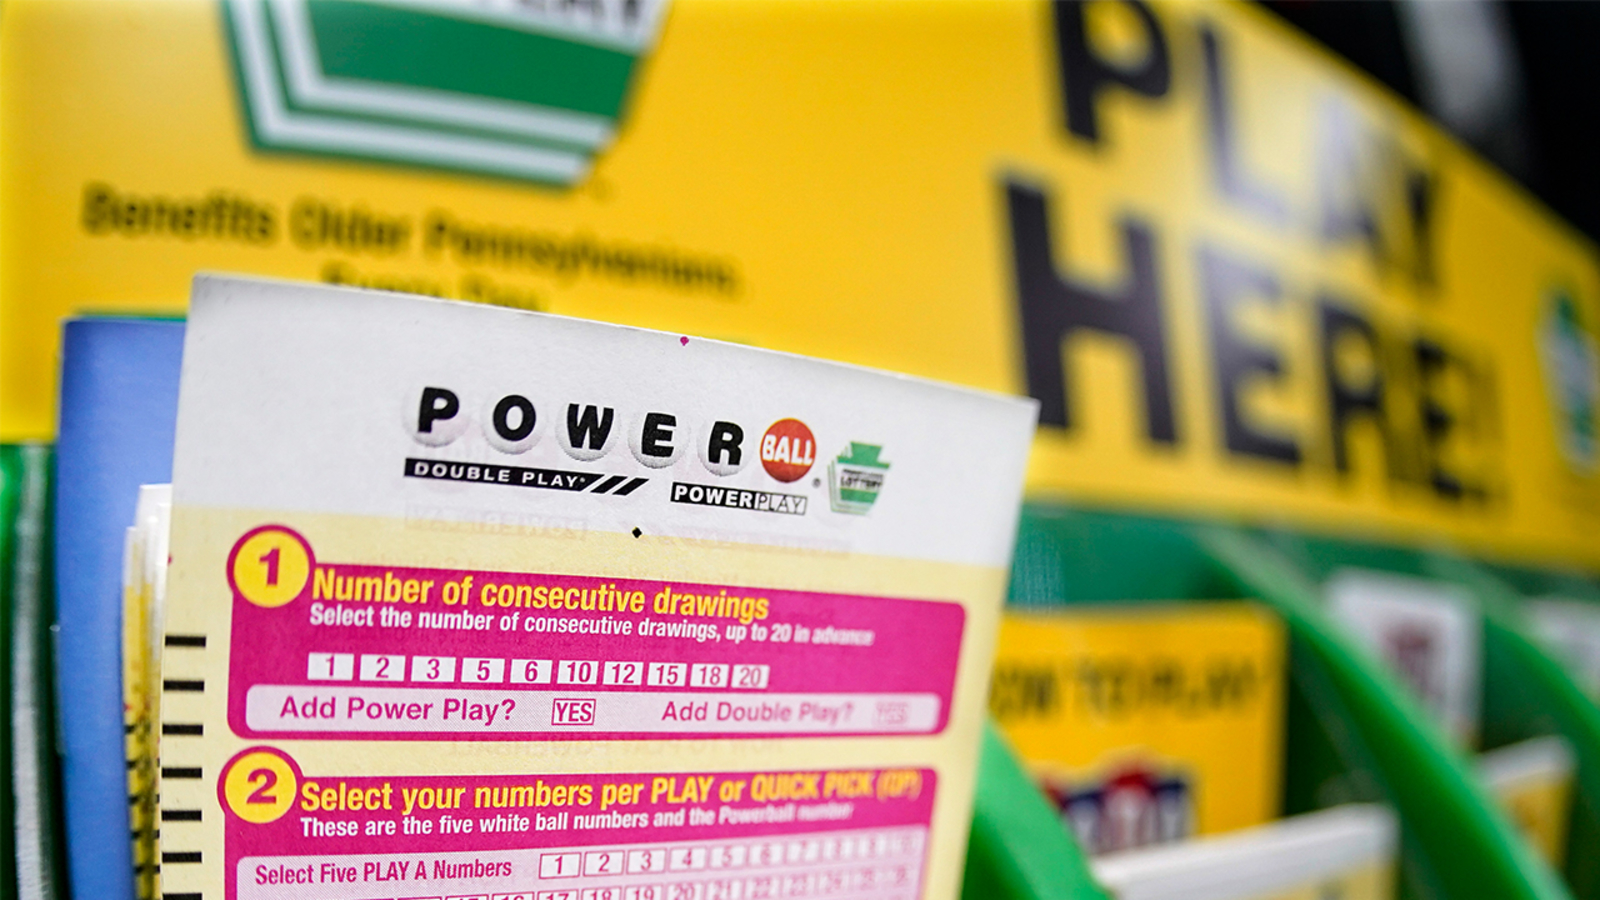 Record-breaking $1.6B up for grabs in tonight’s lottery drawing